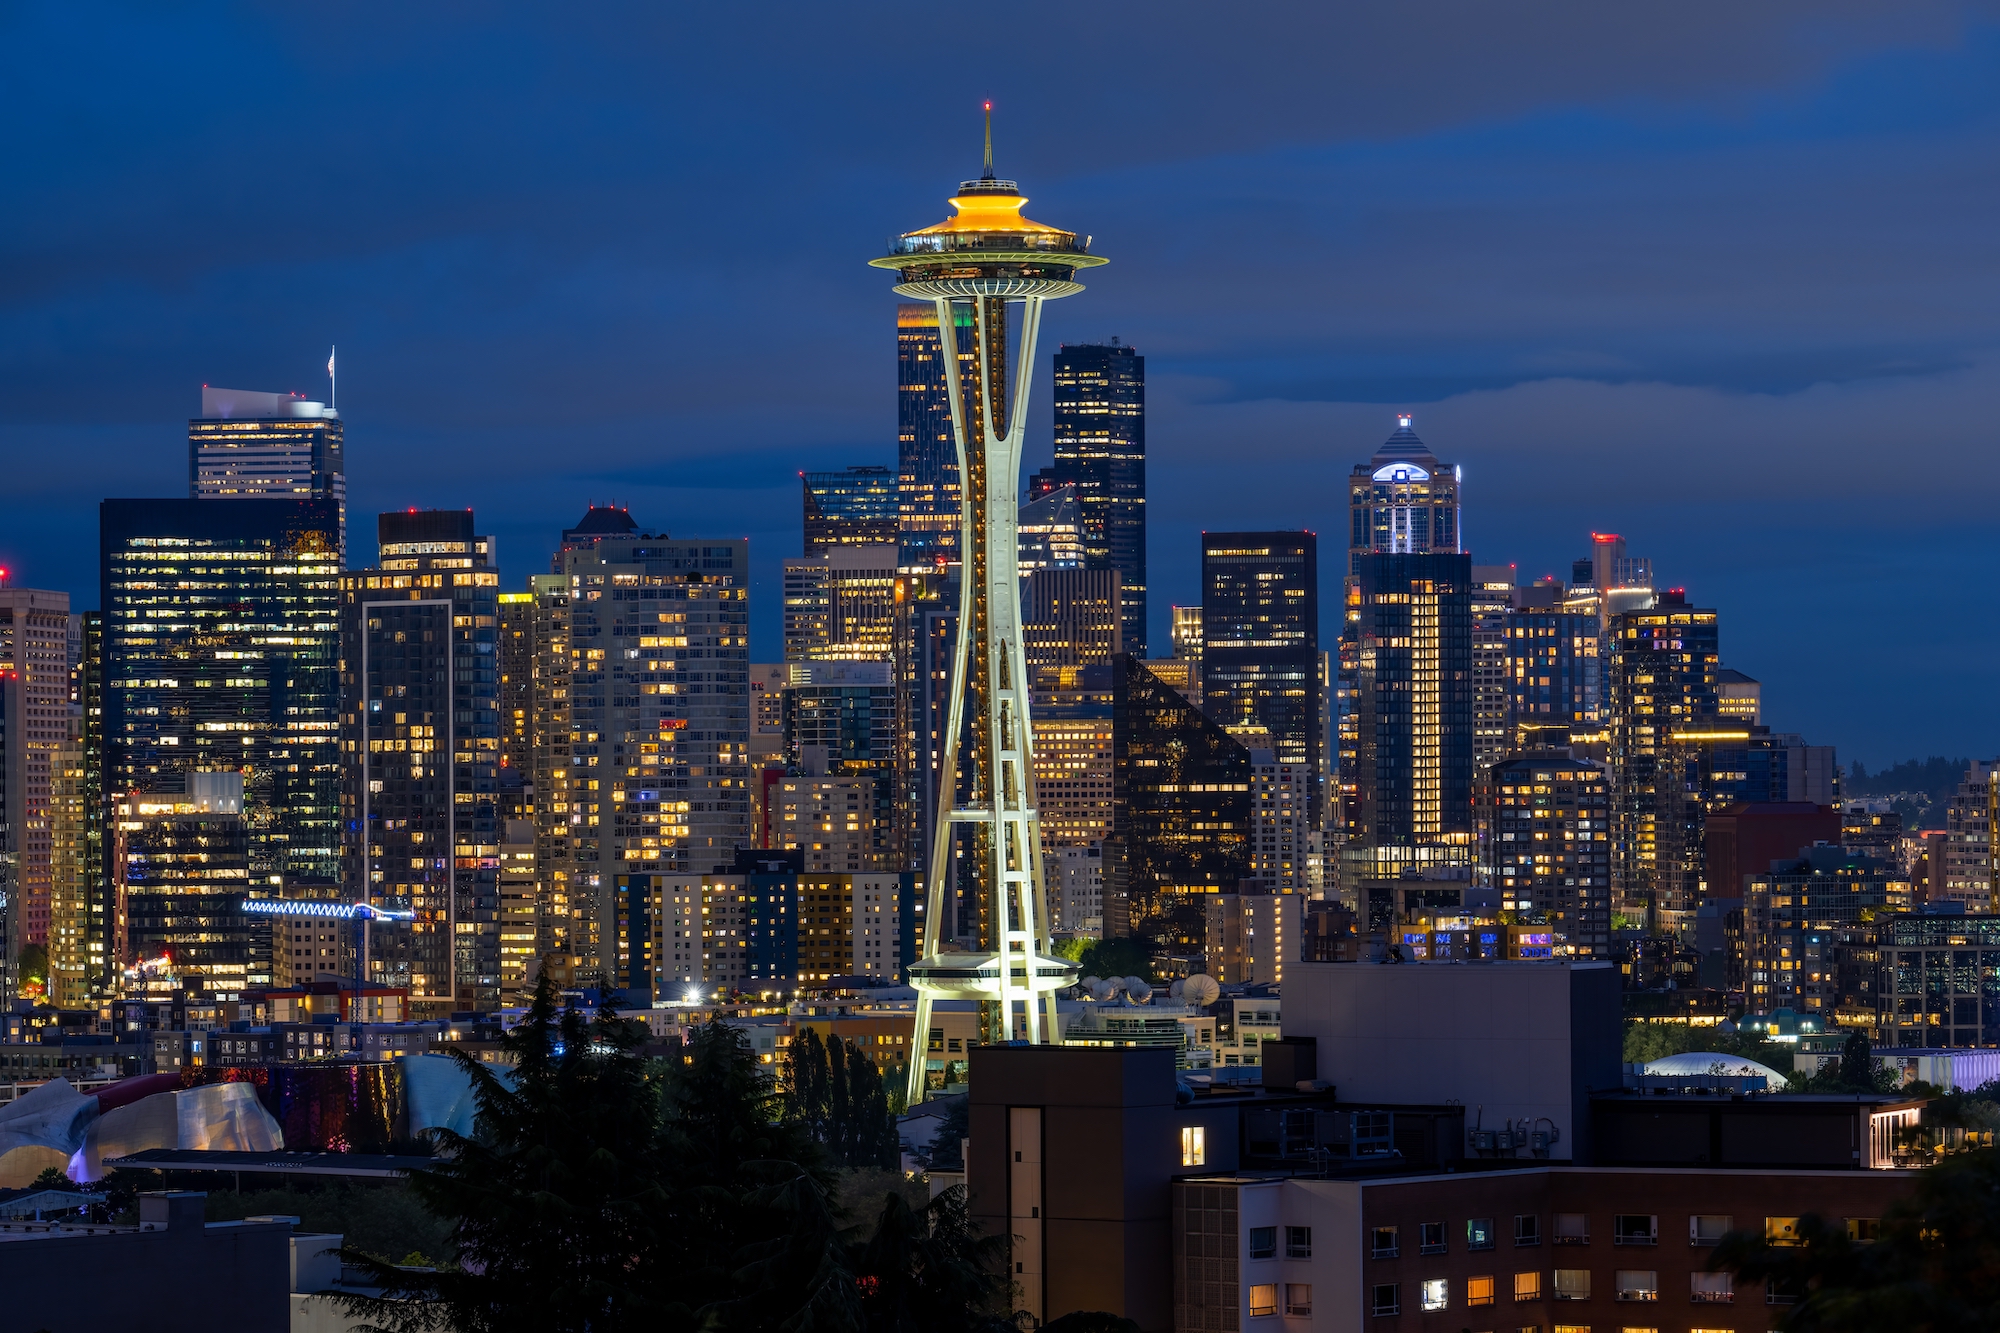 A nighttime photo of the Seattle skyline.